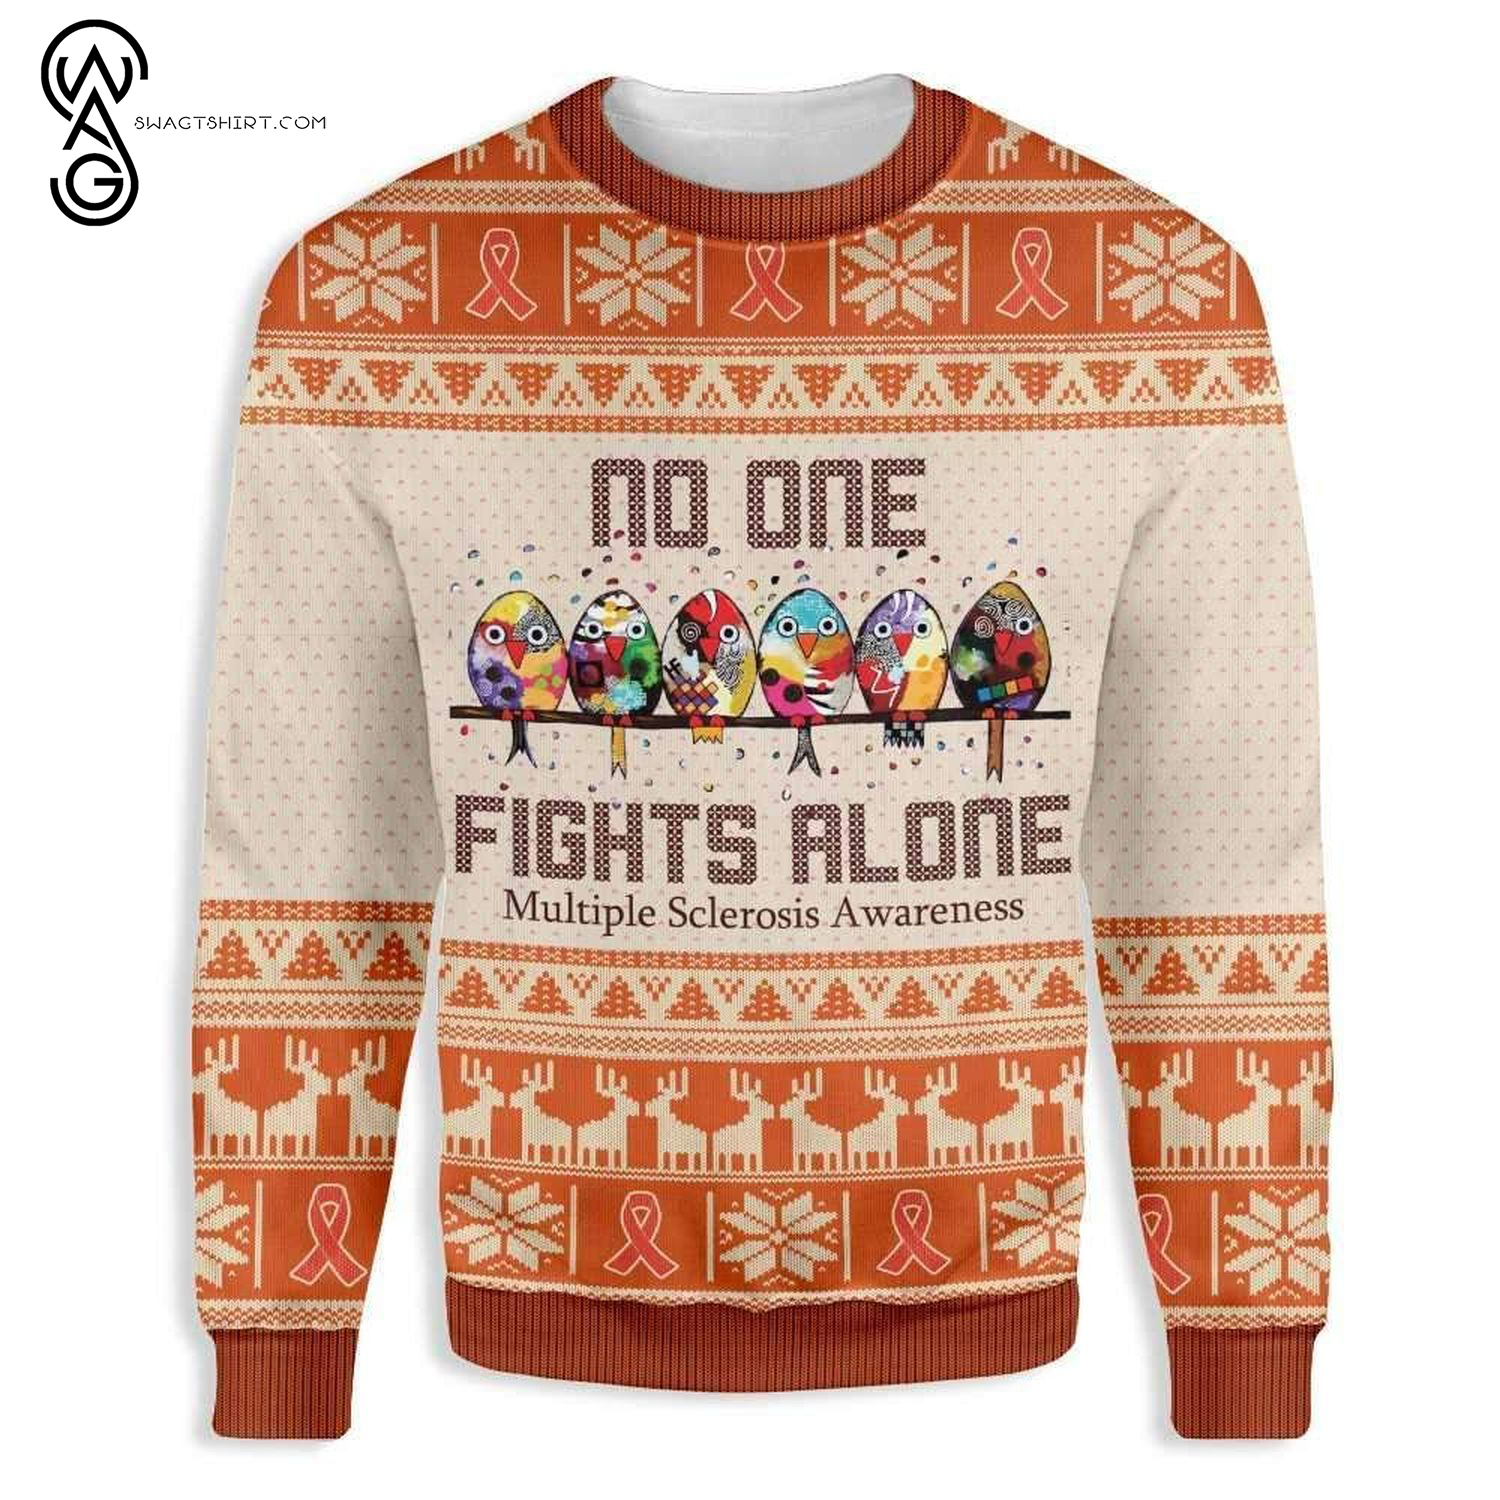 No One Fights Alone Multiple Sclerosis Awareness Full Print Ugly Christmas Sweater